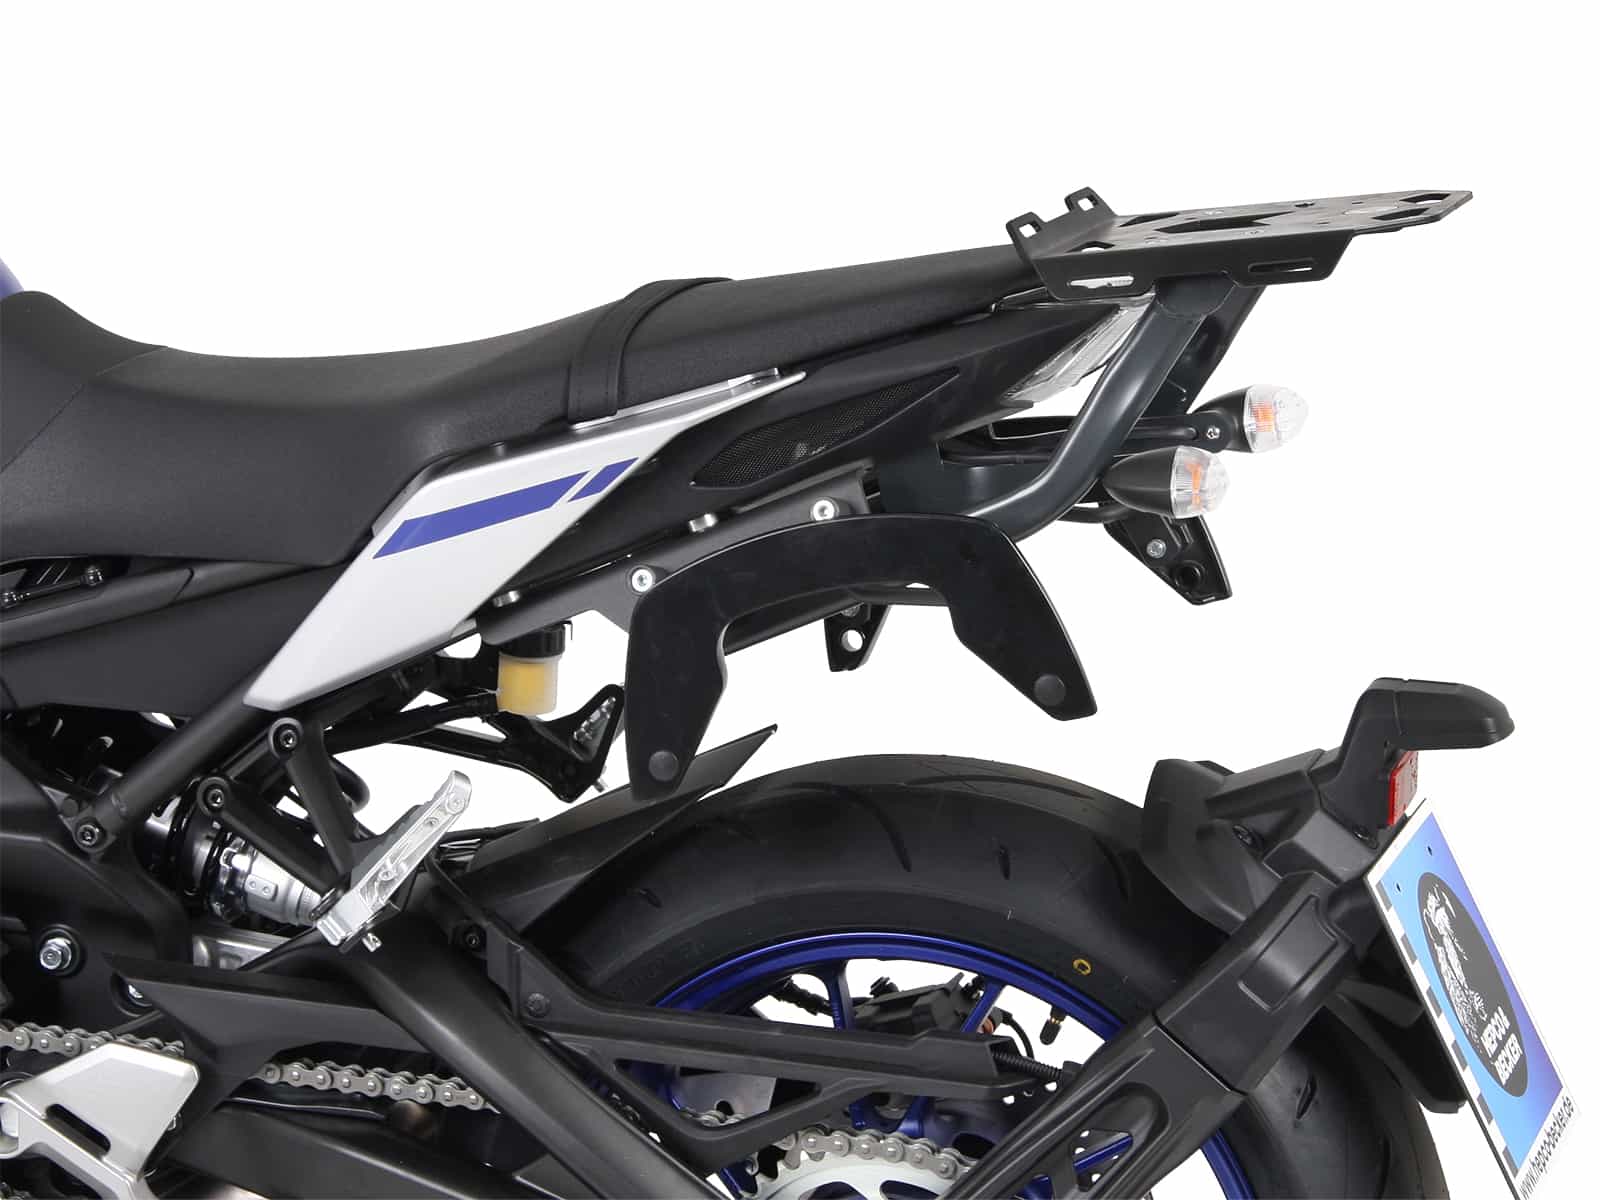 C-Bow sidecarrier for Yamaha MT-09 (2017-2020)